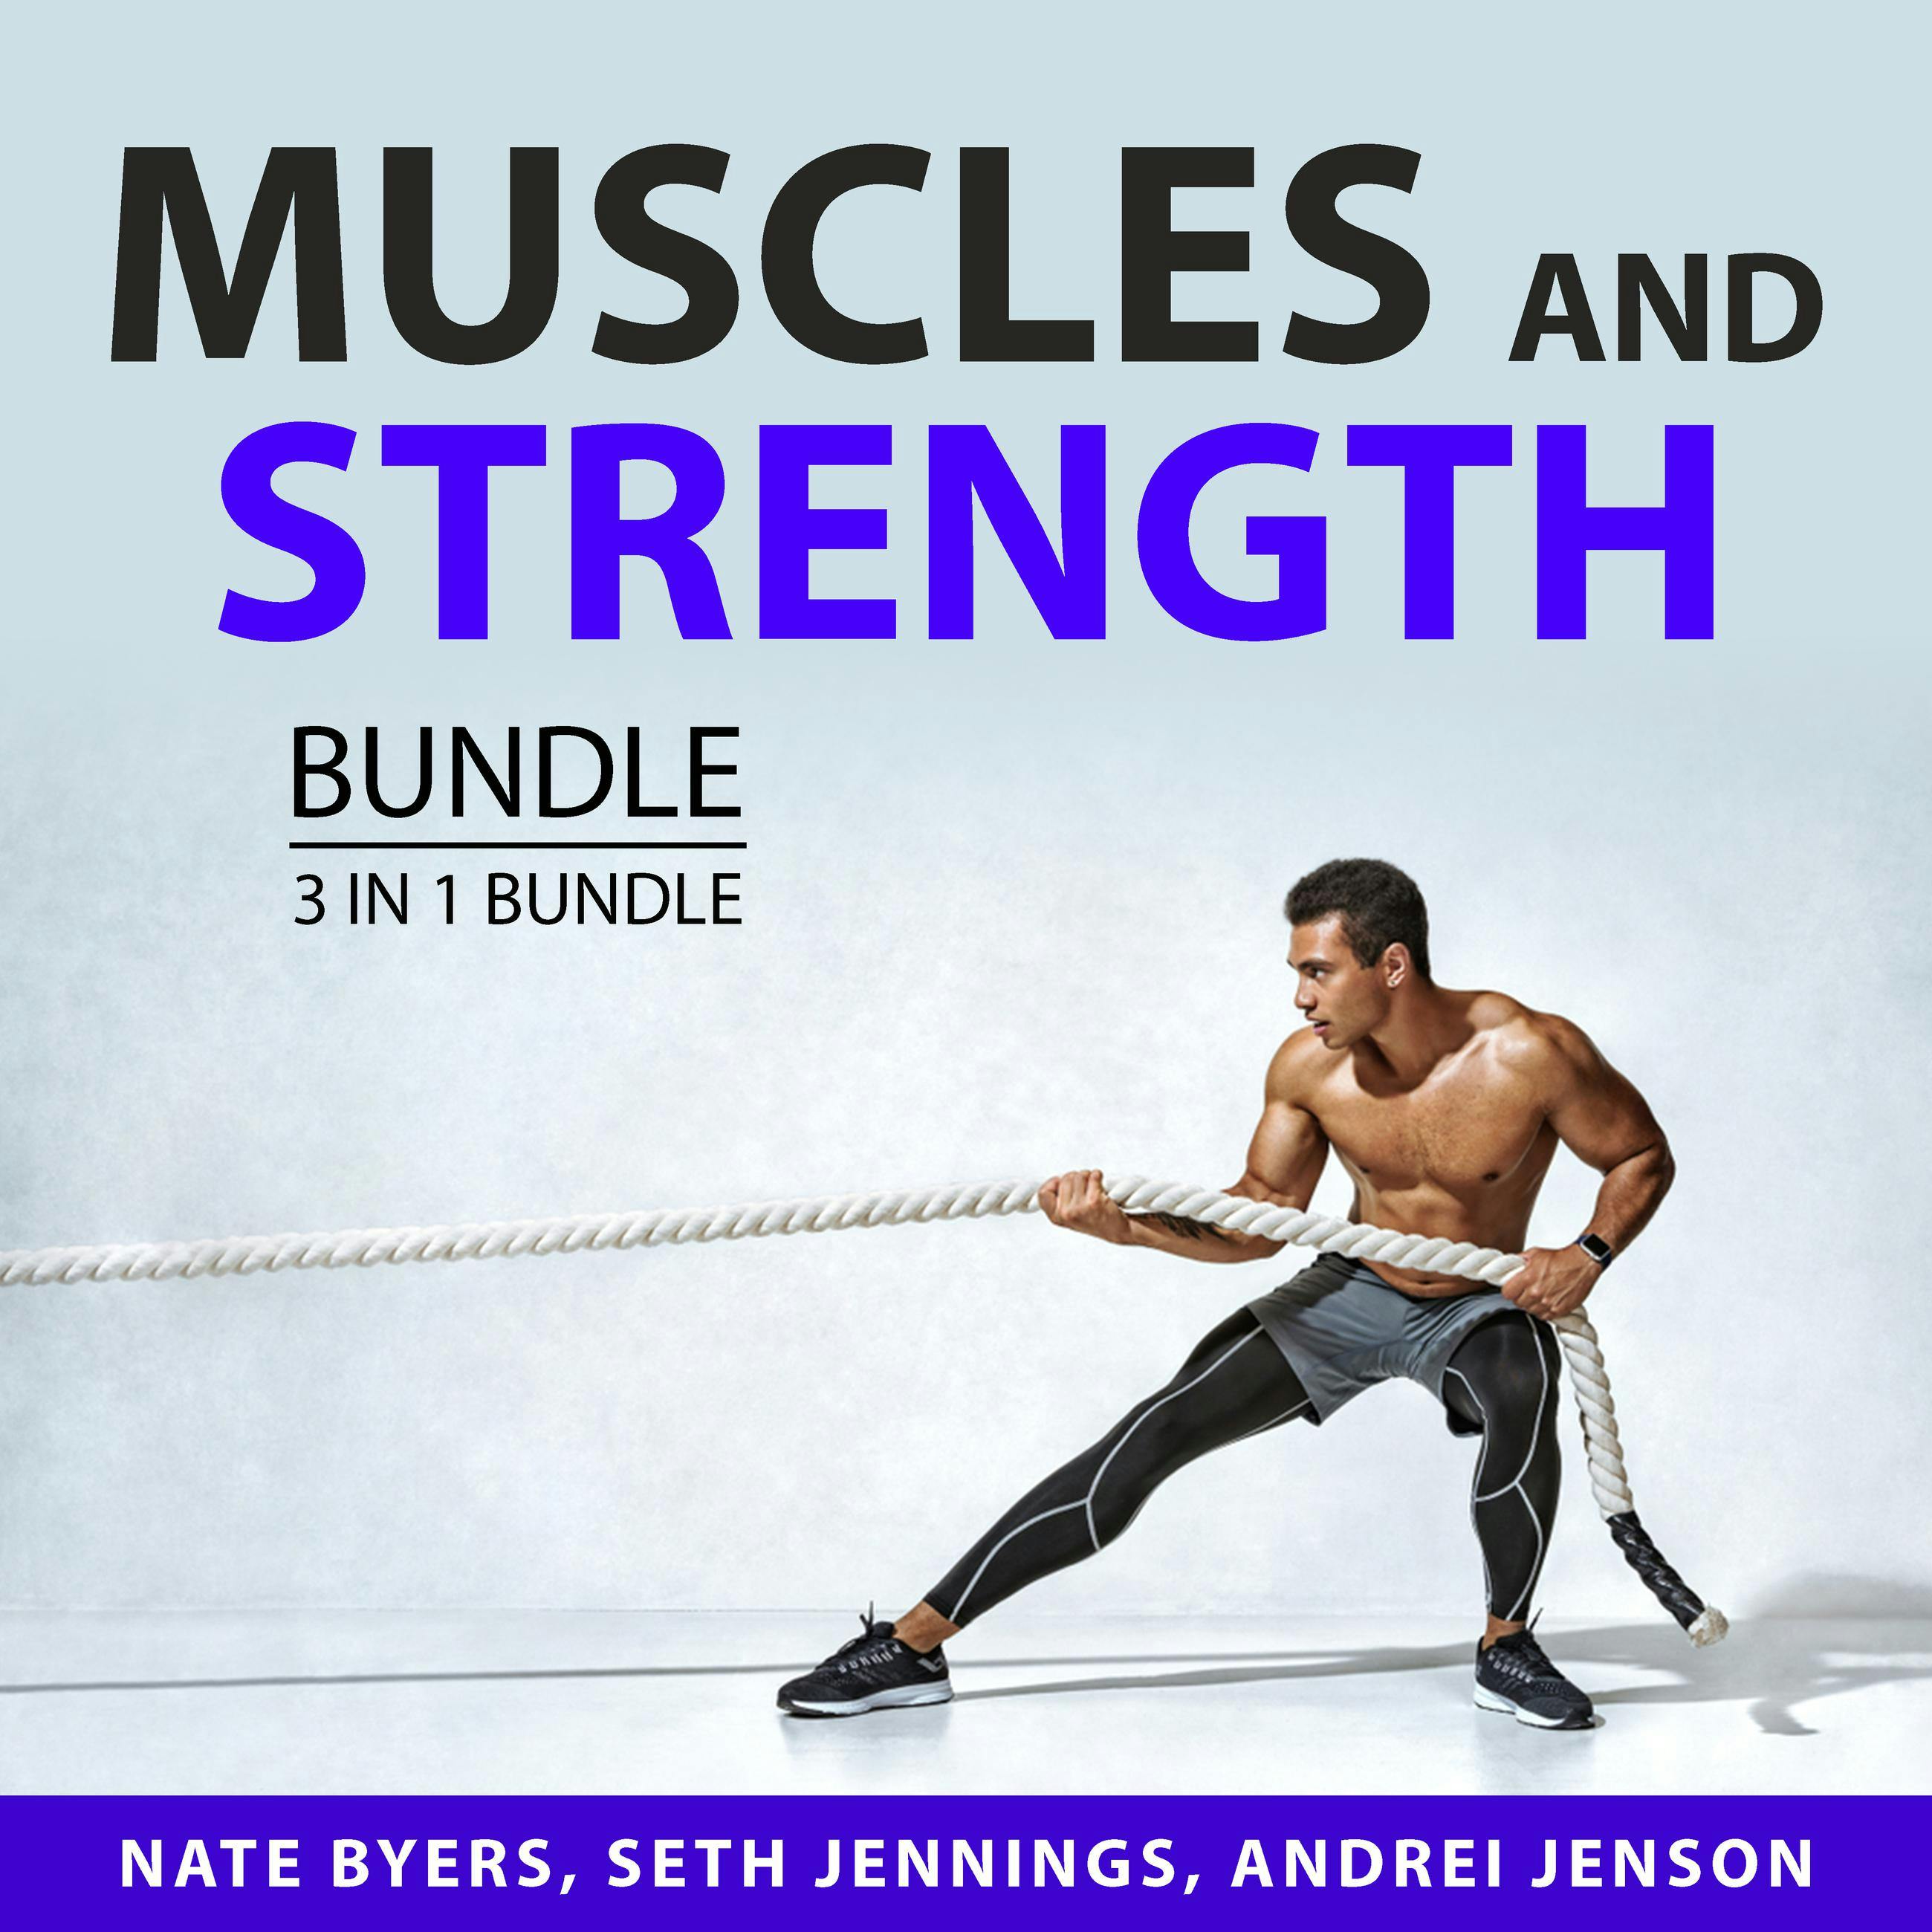 Muscles and Strength Bundle, 3 in 1 Bundle: Easy Guide to Muscle Building, Built Like a Spartan, and Weight Training - undefined